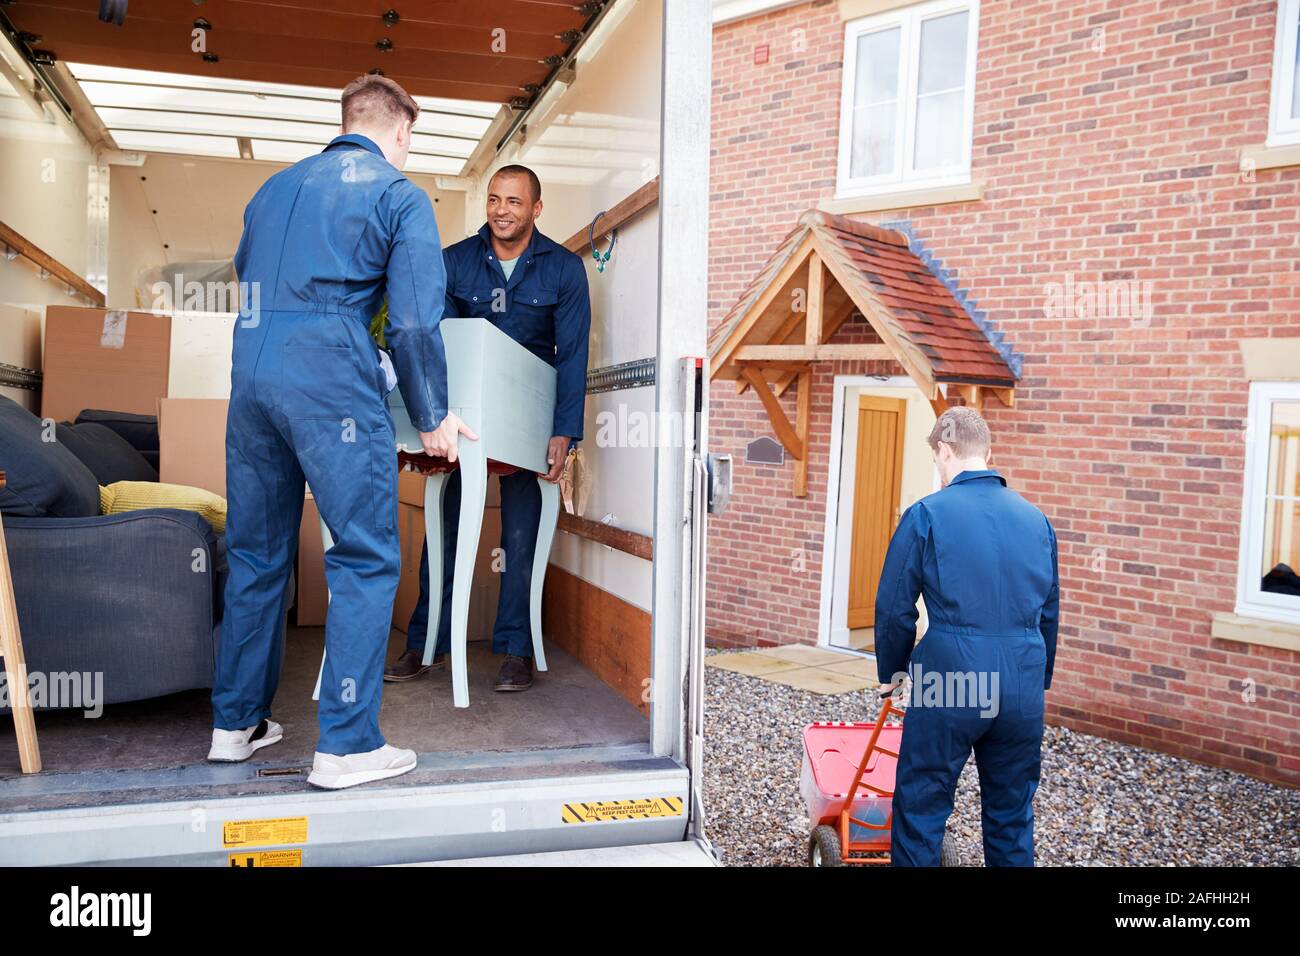 Removal Company Workers Unloading Furniture And Boxes From Truck Into New Home On Moving Day Stock Photo